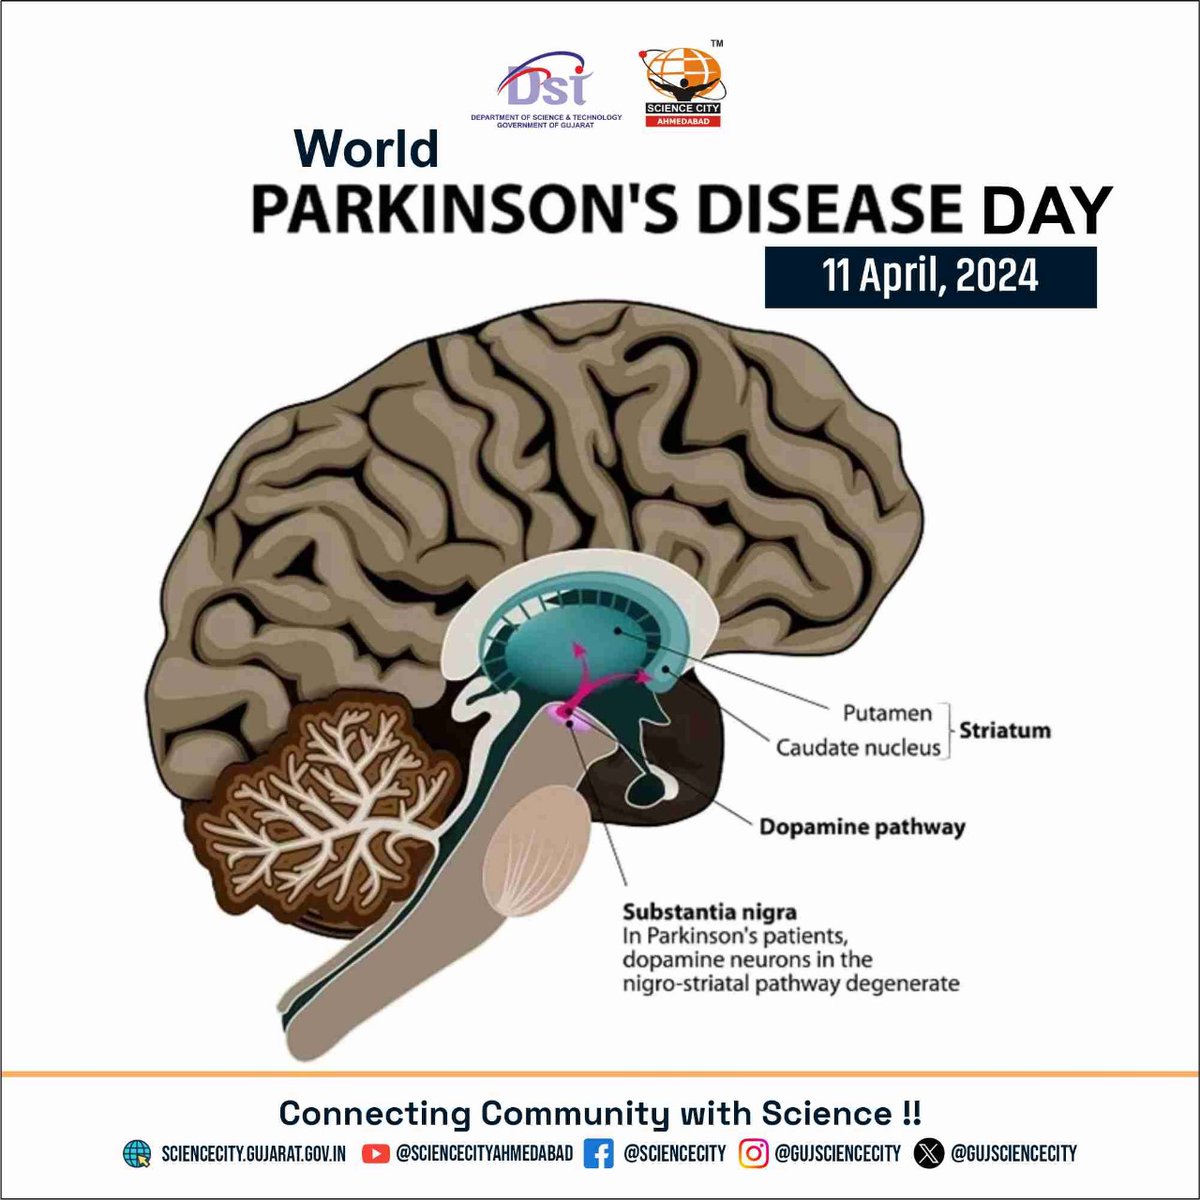 Today, Gujarat Science City stands with the global community in raising awareness for Parkinson's Disease. Let's unite to support research, advocate for better treatments, and enhance the lives of those affected #chalosciencecity @indiadst @dstgujarat @jbvadar @InfoGujarat